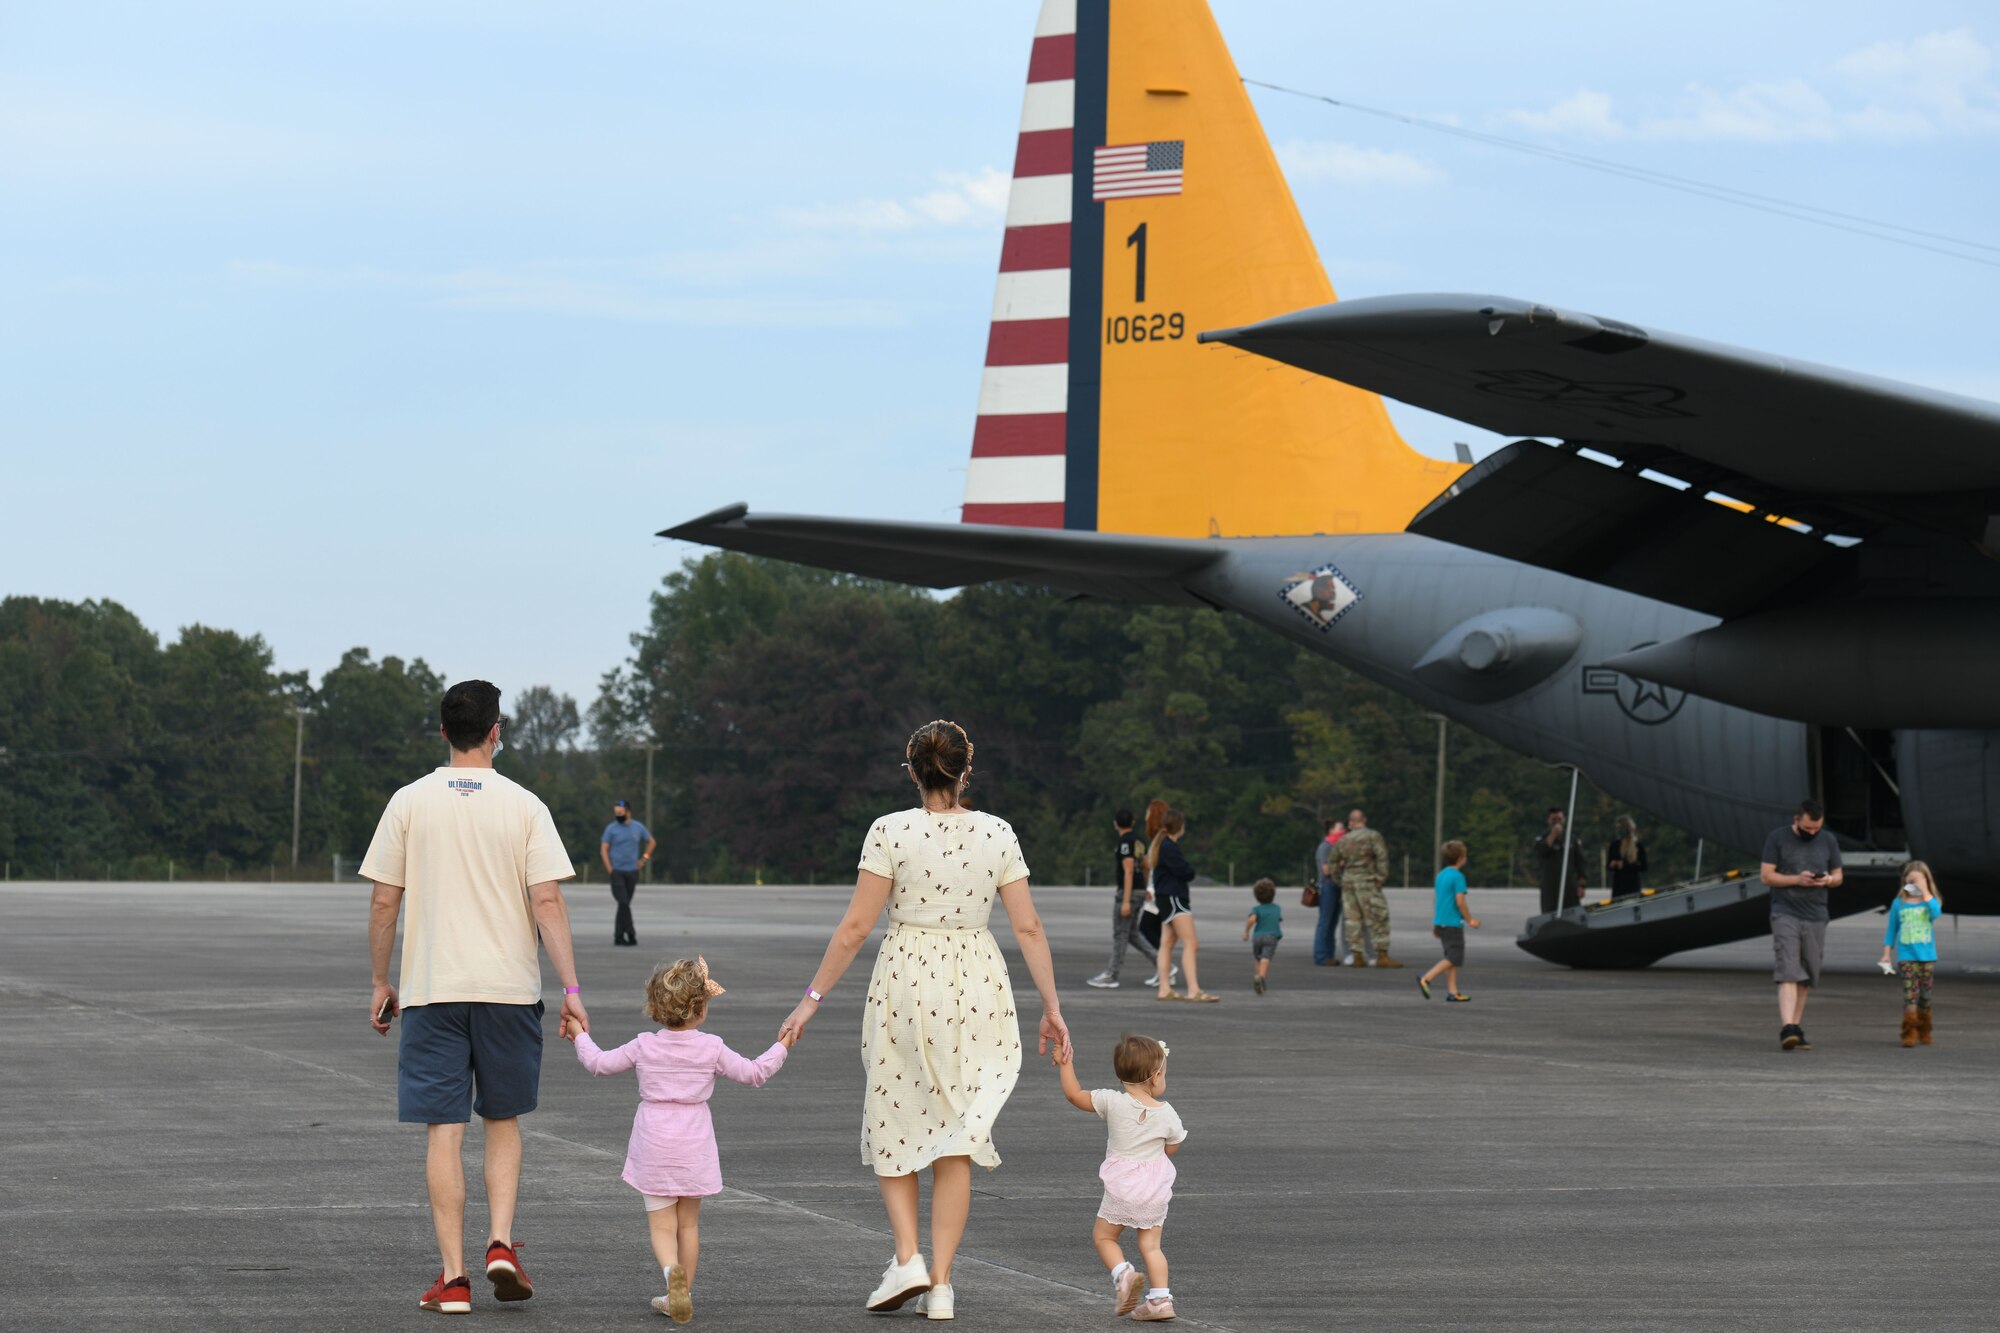 A Family of 4 walks holding hands towards a C-130 plane